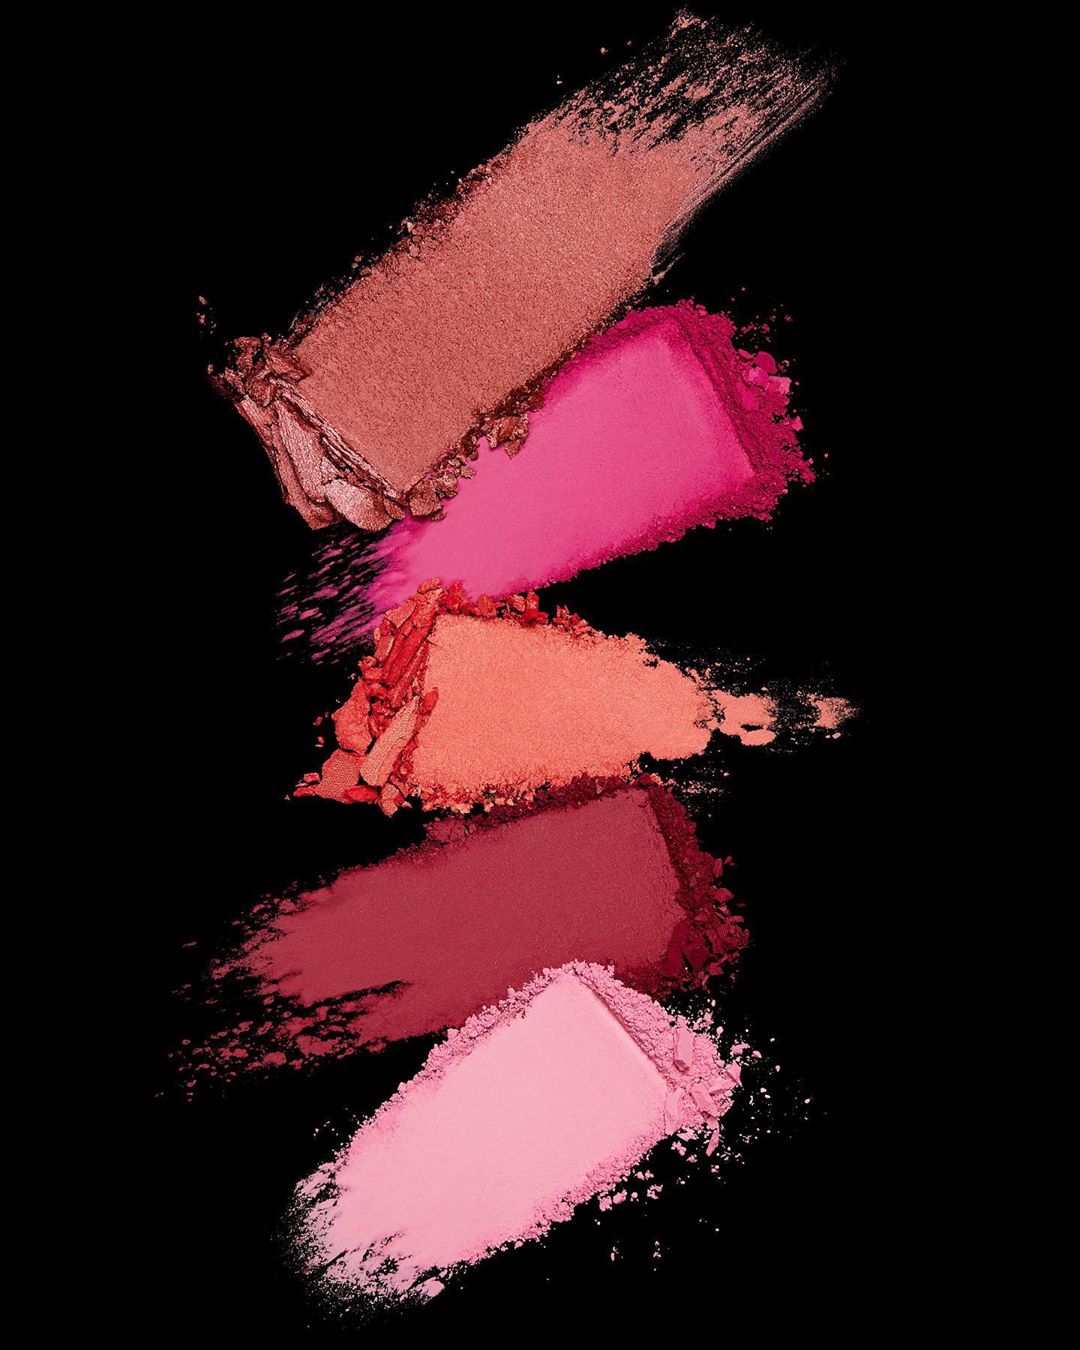 NARS Cosmetics - Ready to start blushing with NARS? Tap to try it on and learn all about our award-winning formula, below. 👇

WIDE VARIETY OF HIGH-PIGMENT SHADES
Create endless looks with a diverse ra...